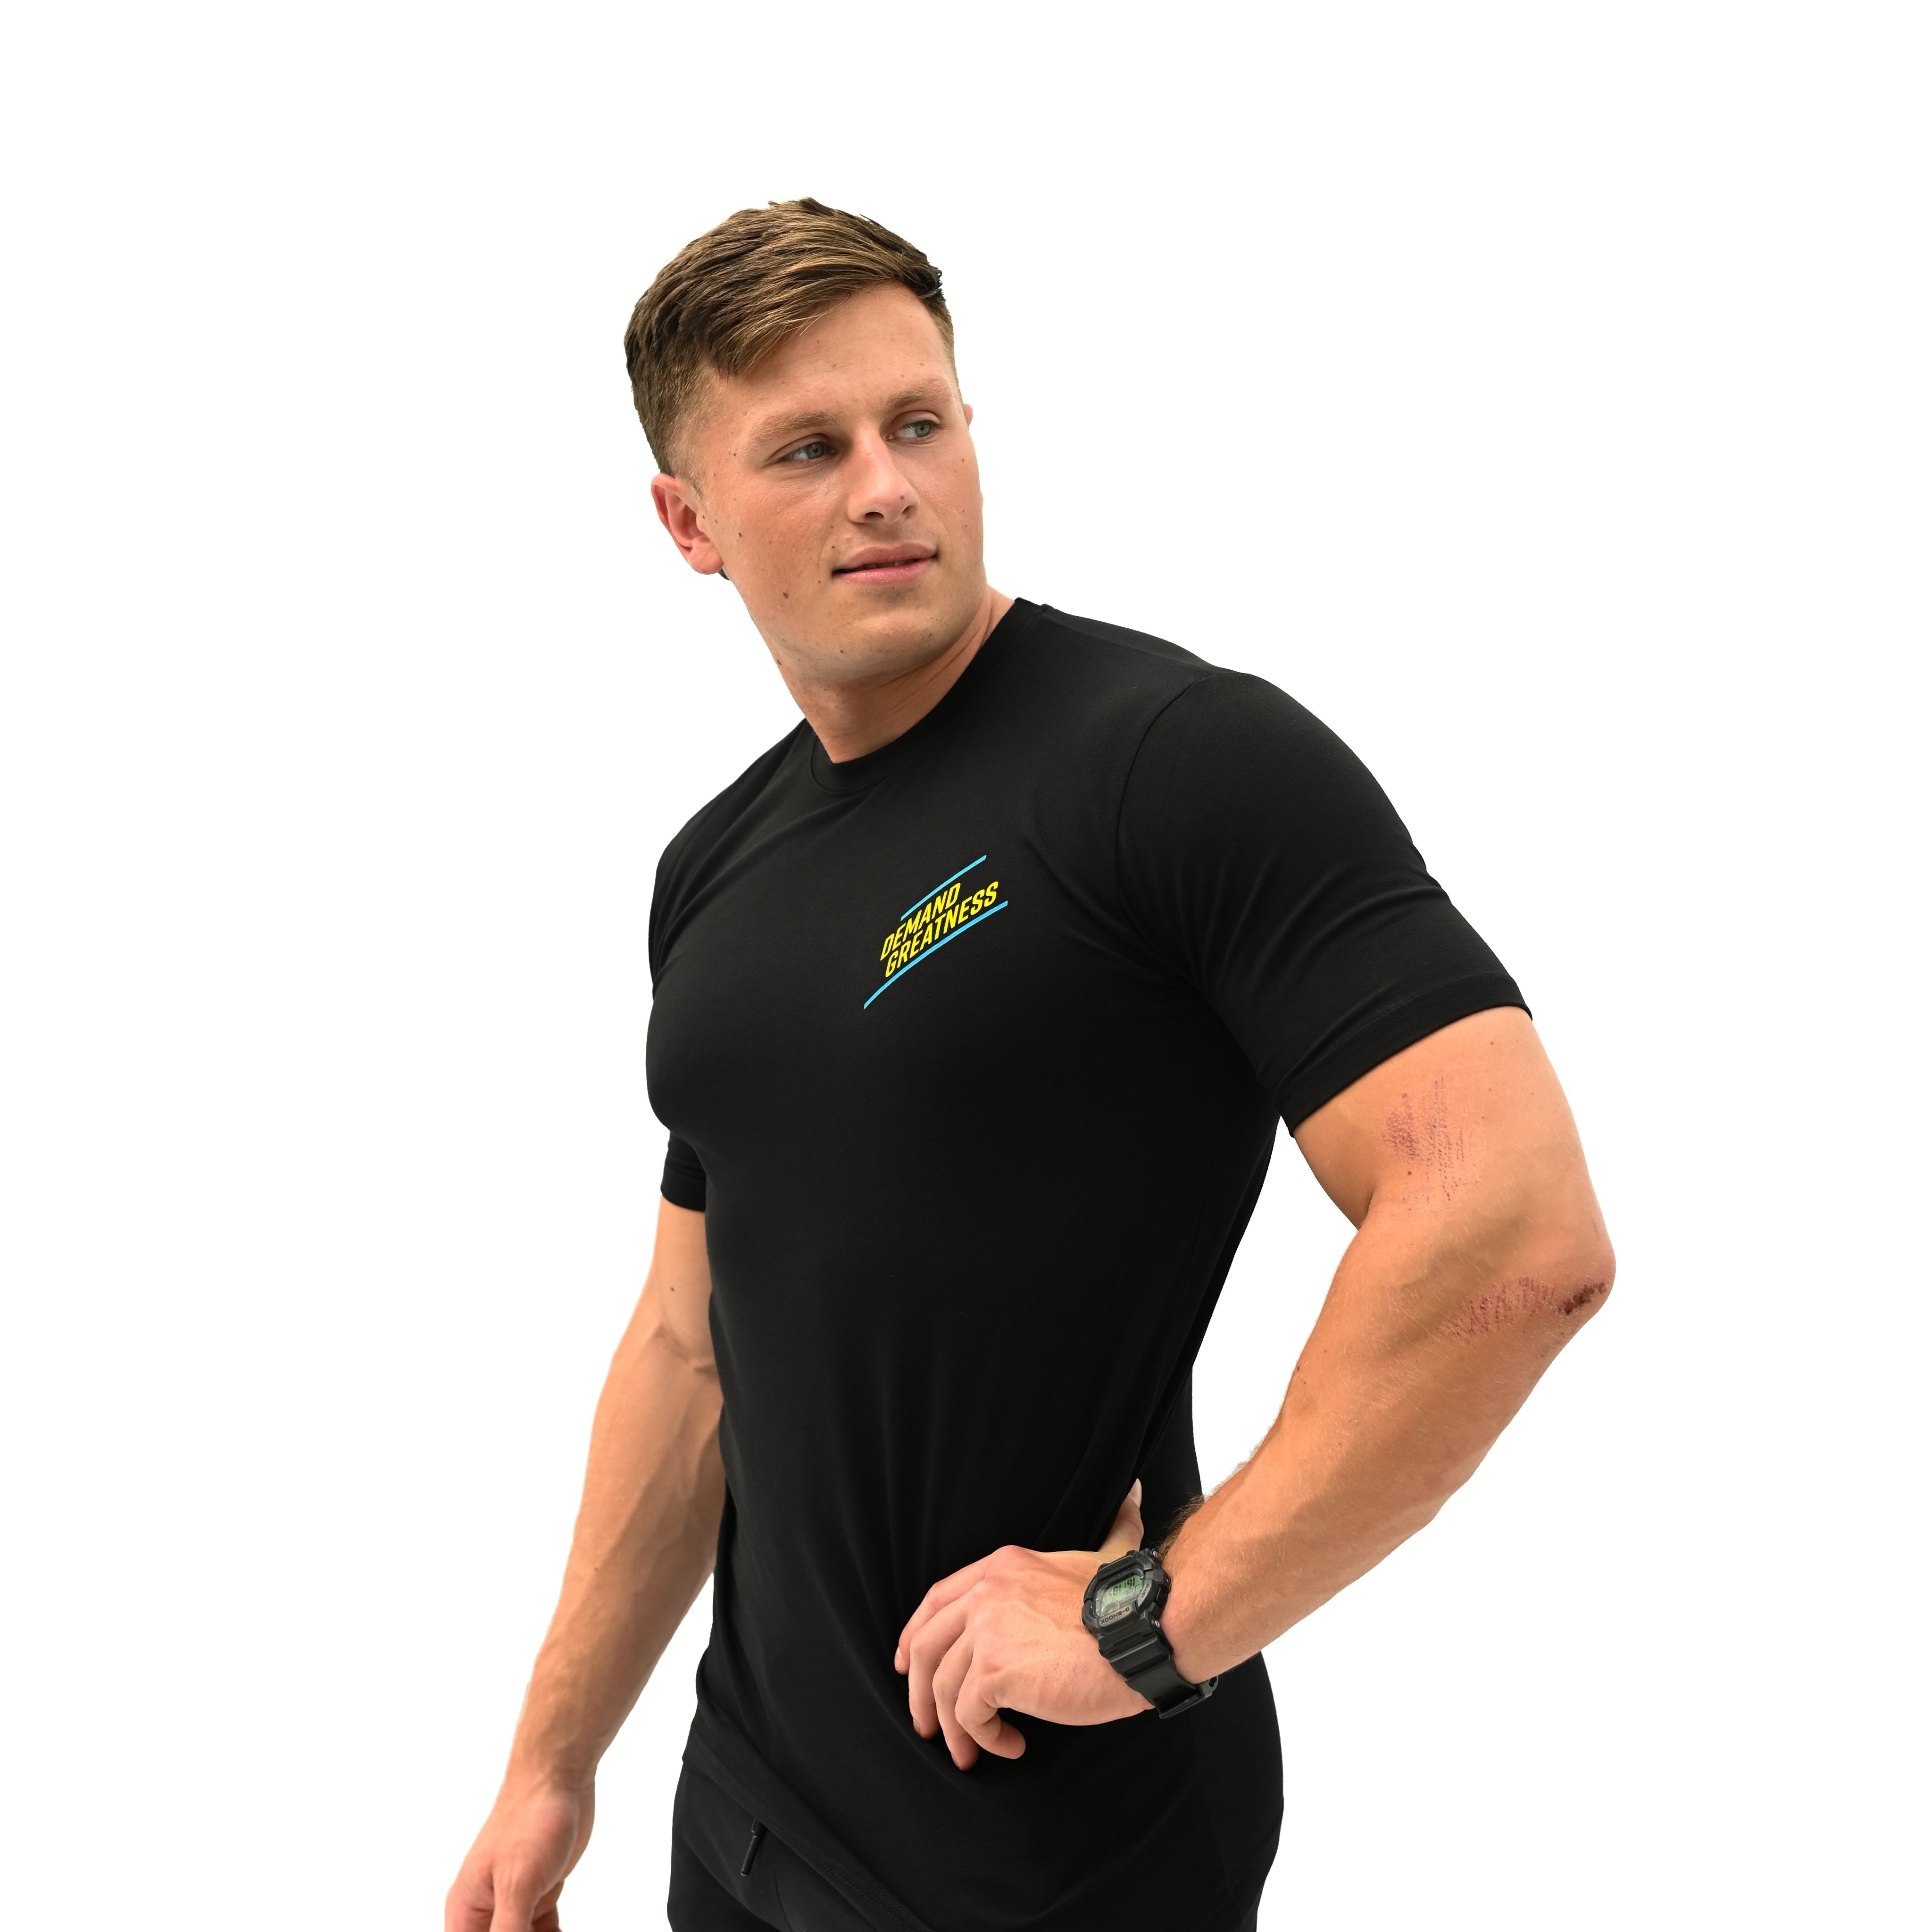 Geo Weave Non Bar Grip T-Shirt is perfect for in and out of the gym. Purchase Geo Weave Non Bar Grip tshirt UK from A7 UK. Purchase Geo Weave Shirt Europe from A7 UK. Best gymwear shipping to UK and Europe from A7 UK. Geo Weave is our newest Non Bar Grip Design. The best Powerlifting apparel for all your workouts. Available in UK and Europe including France, Italy, Germany, Sweden and Poland.